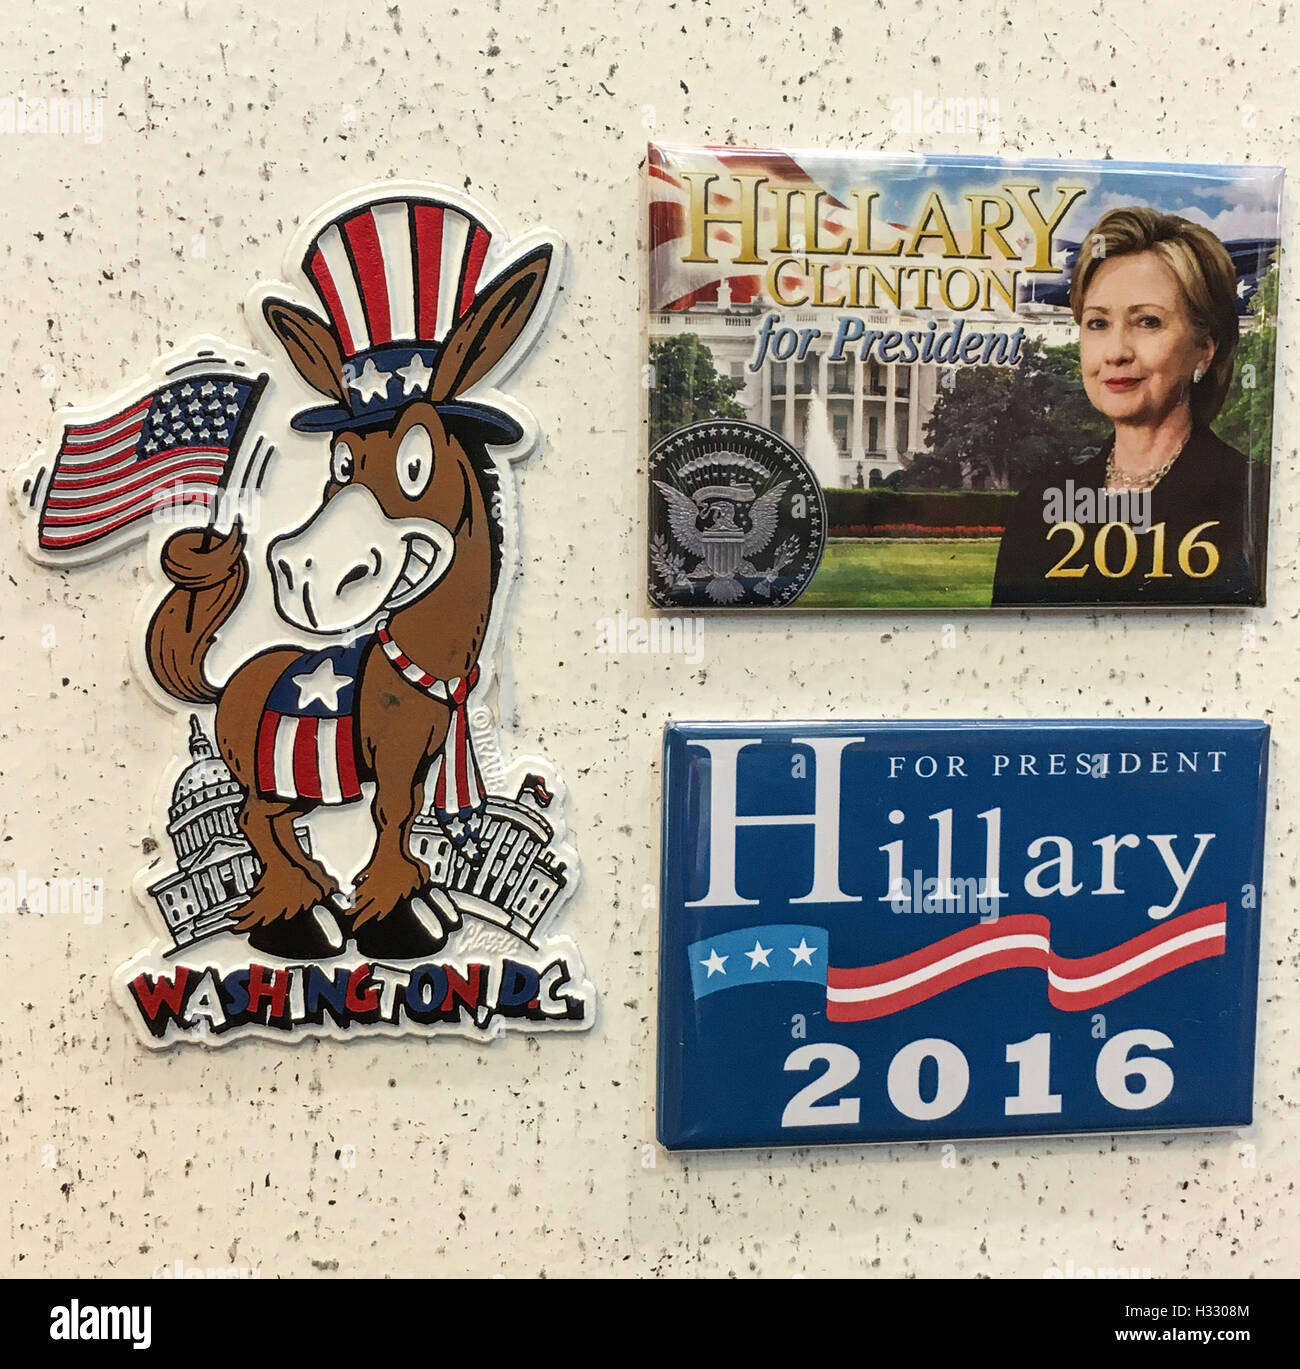 Effigy of Hillary Clinton on different items during the american presidential campaign, USA Stock Photo